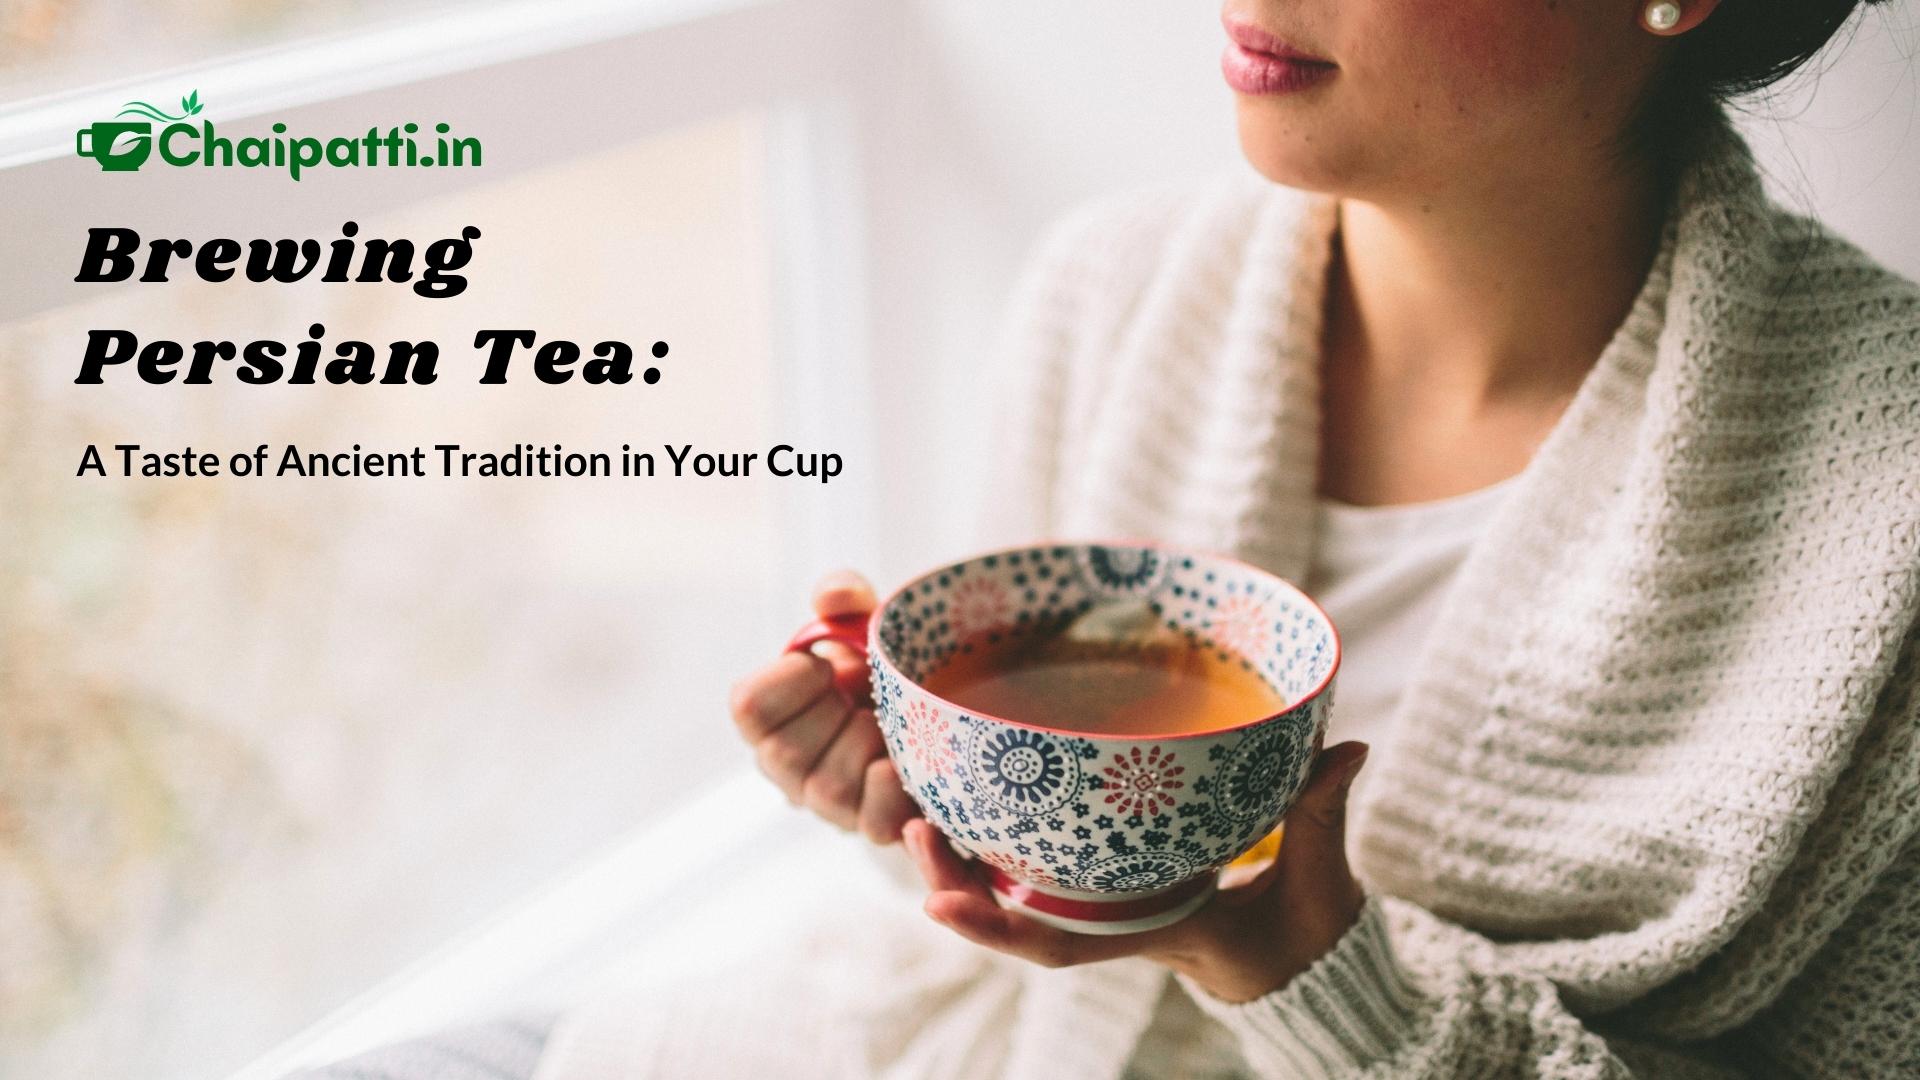 Brewing Persian Tea: A Taste of Ancient Tradition in Your Cup